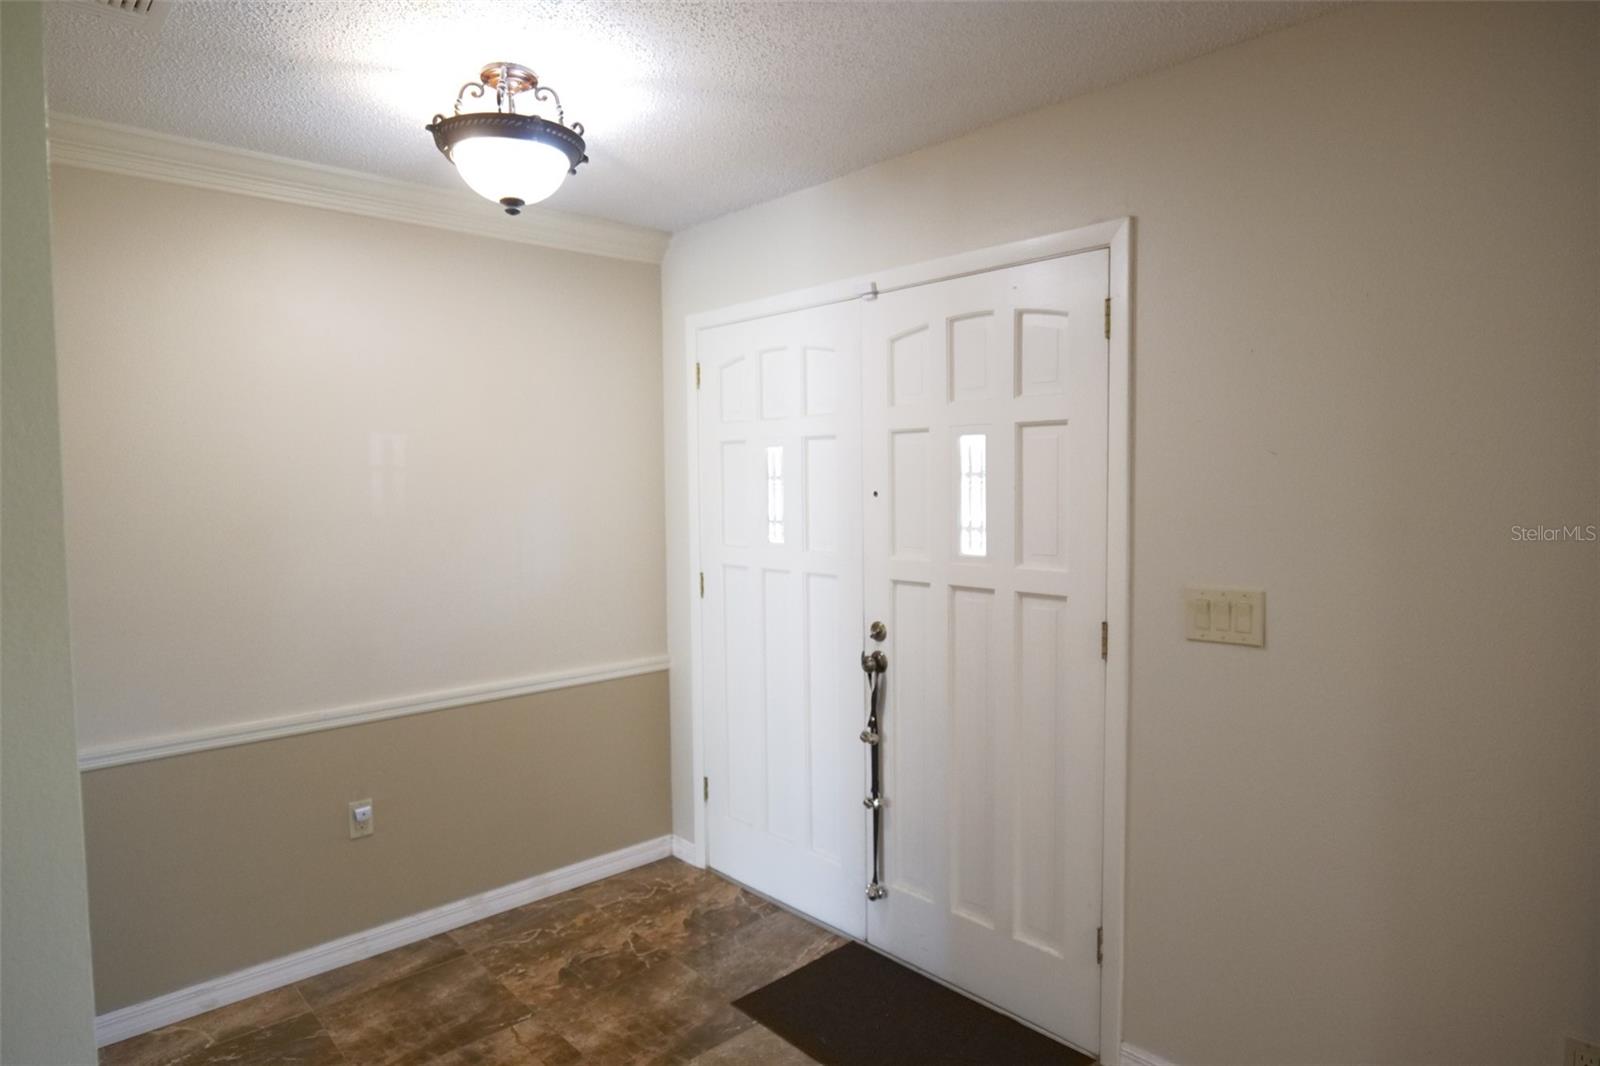 Foyer with a large closet